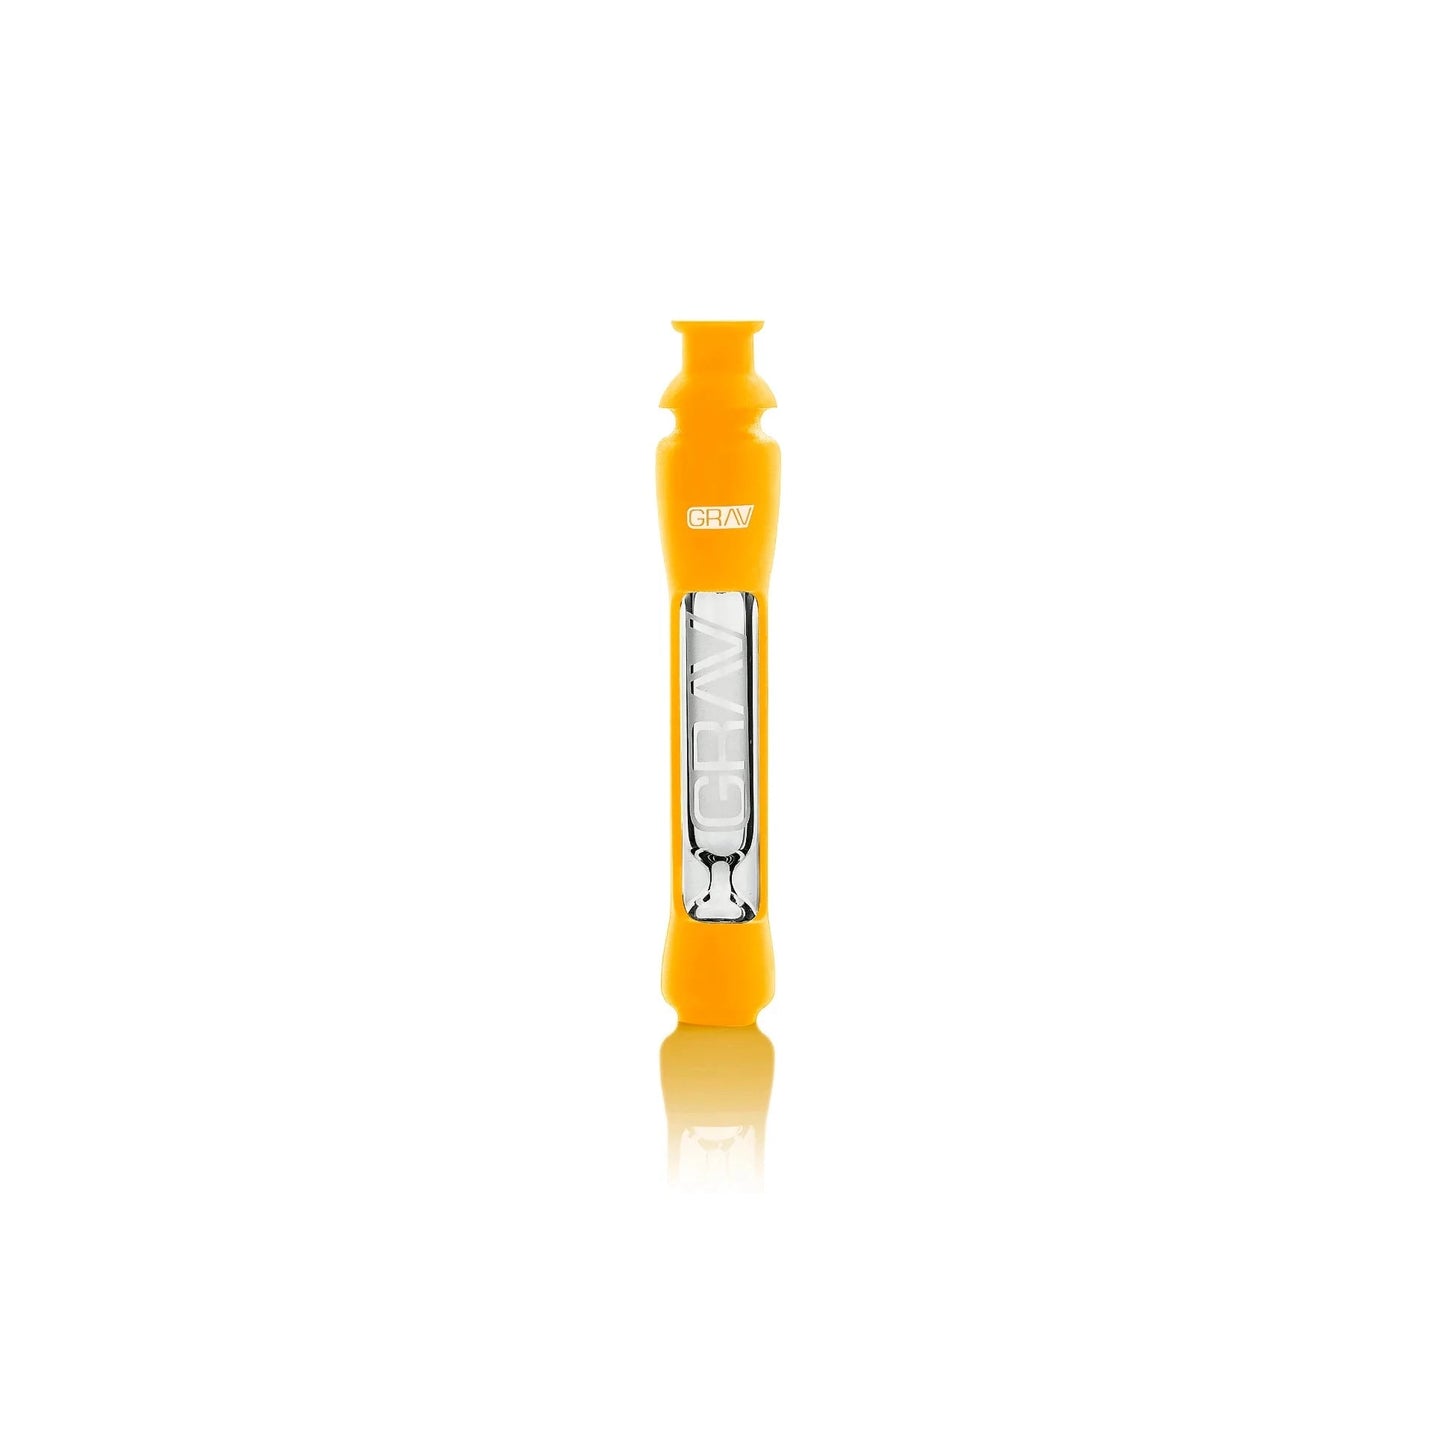 GRAV®  - 12mm Taster with Silicone Sleeve